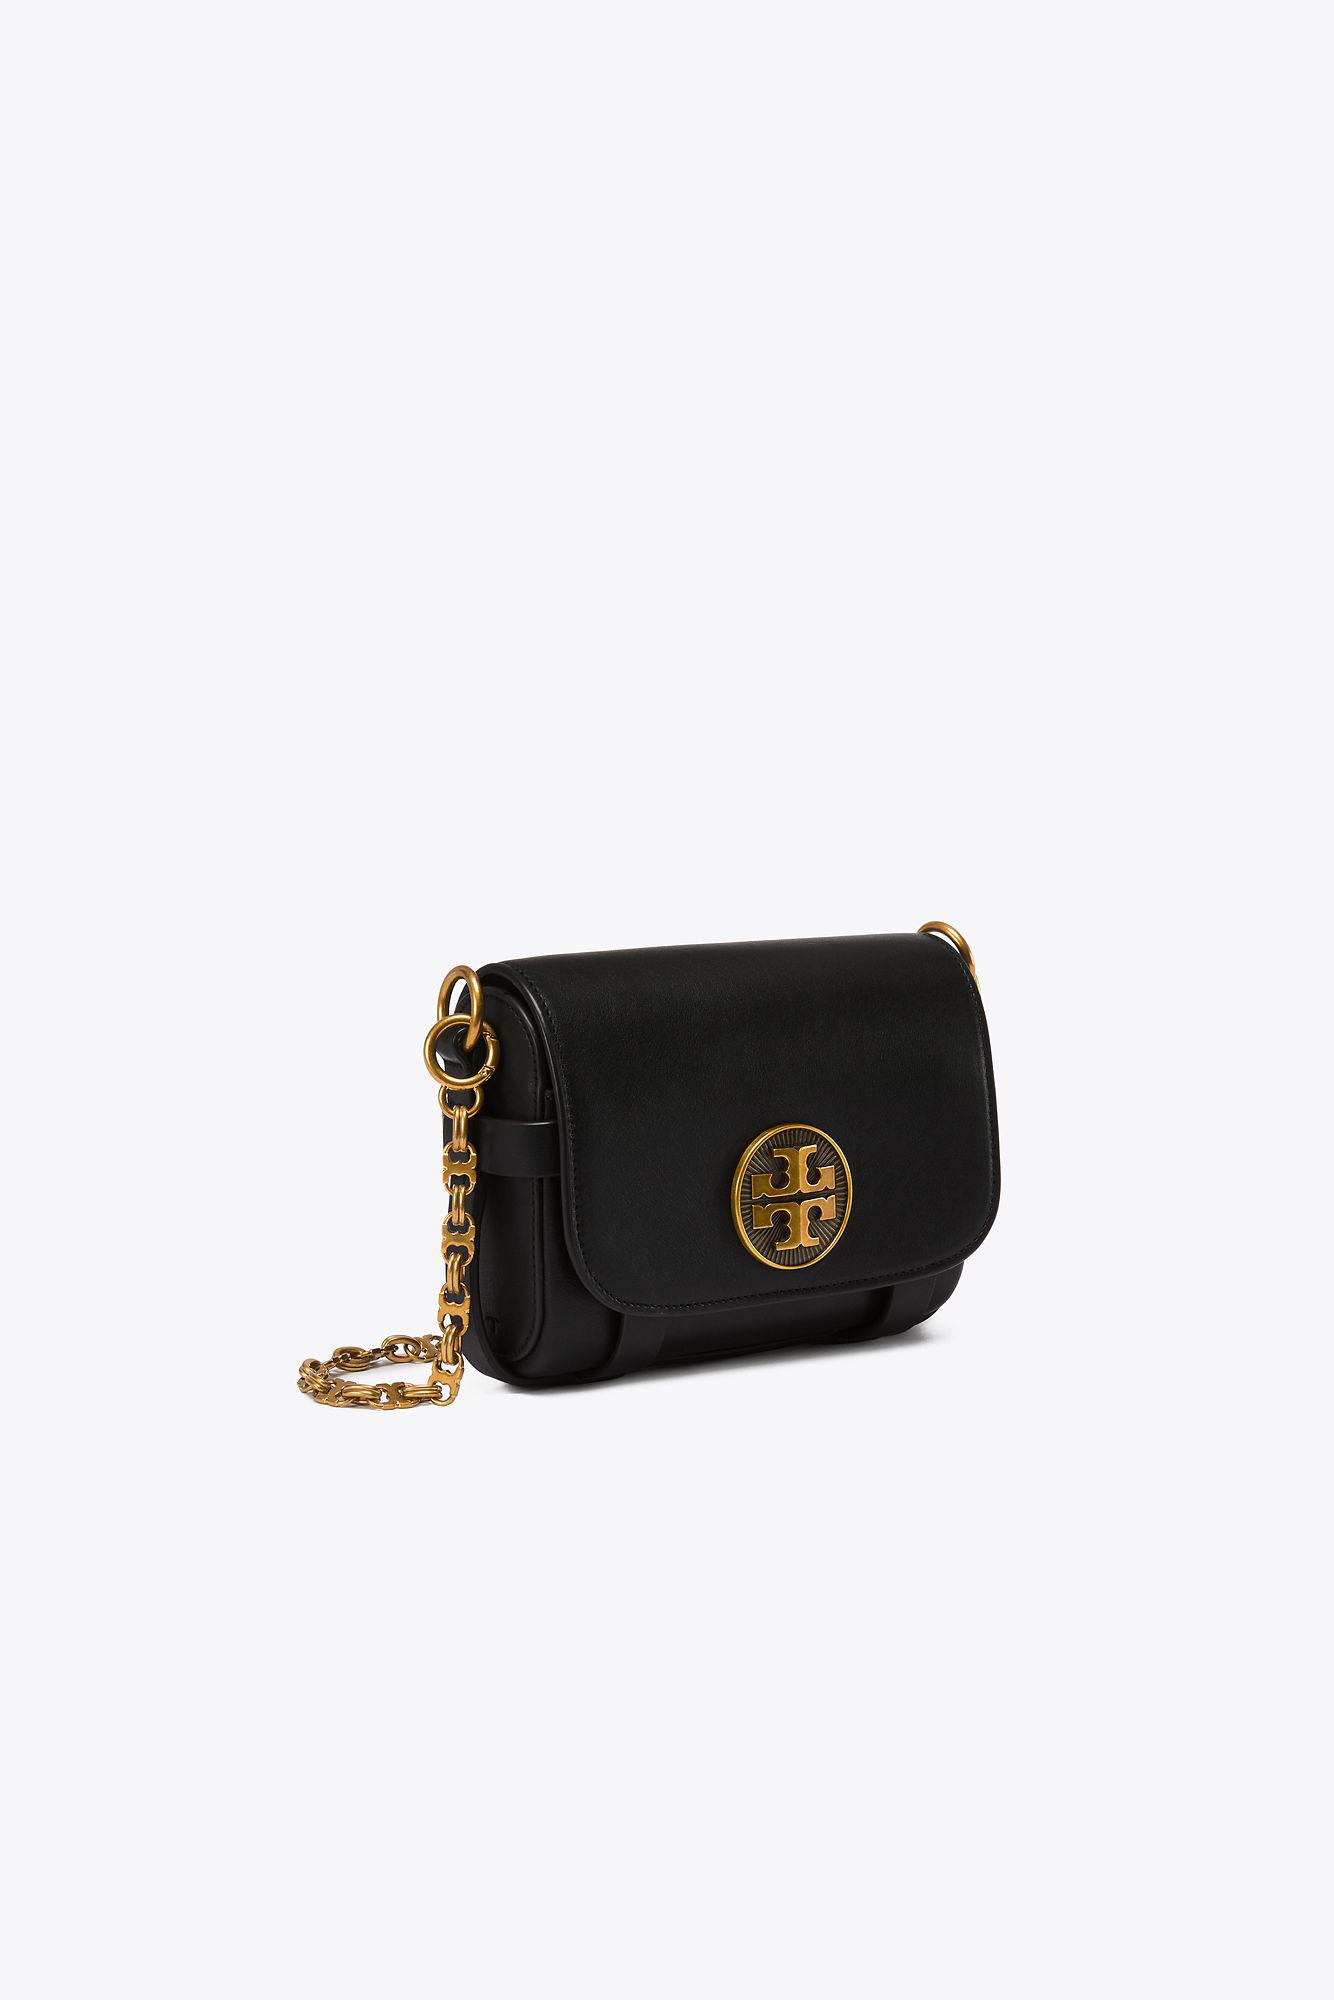 NEW 2023 EDGY Tory Burch Handbag Collection | Look For Less - YouTube